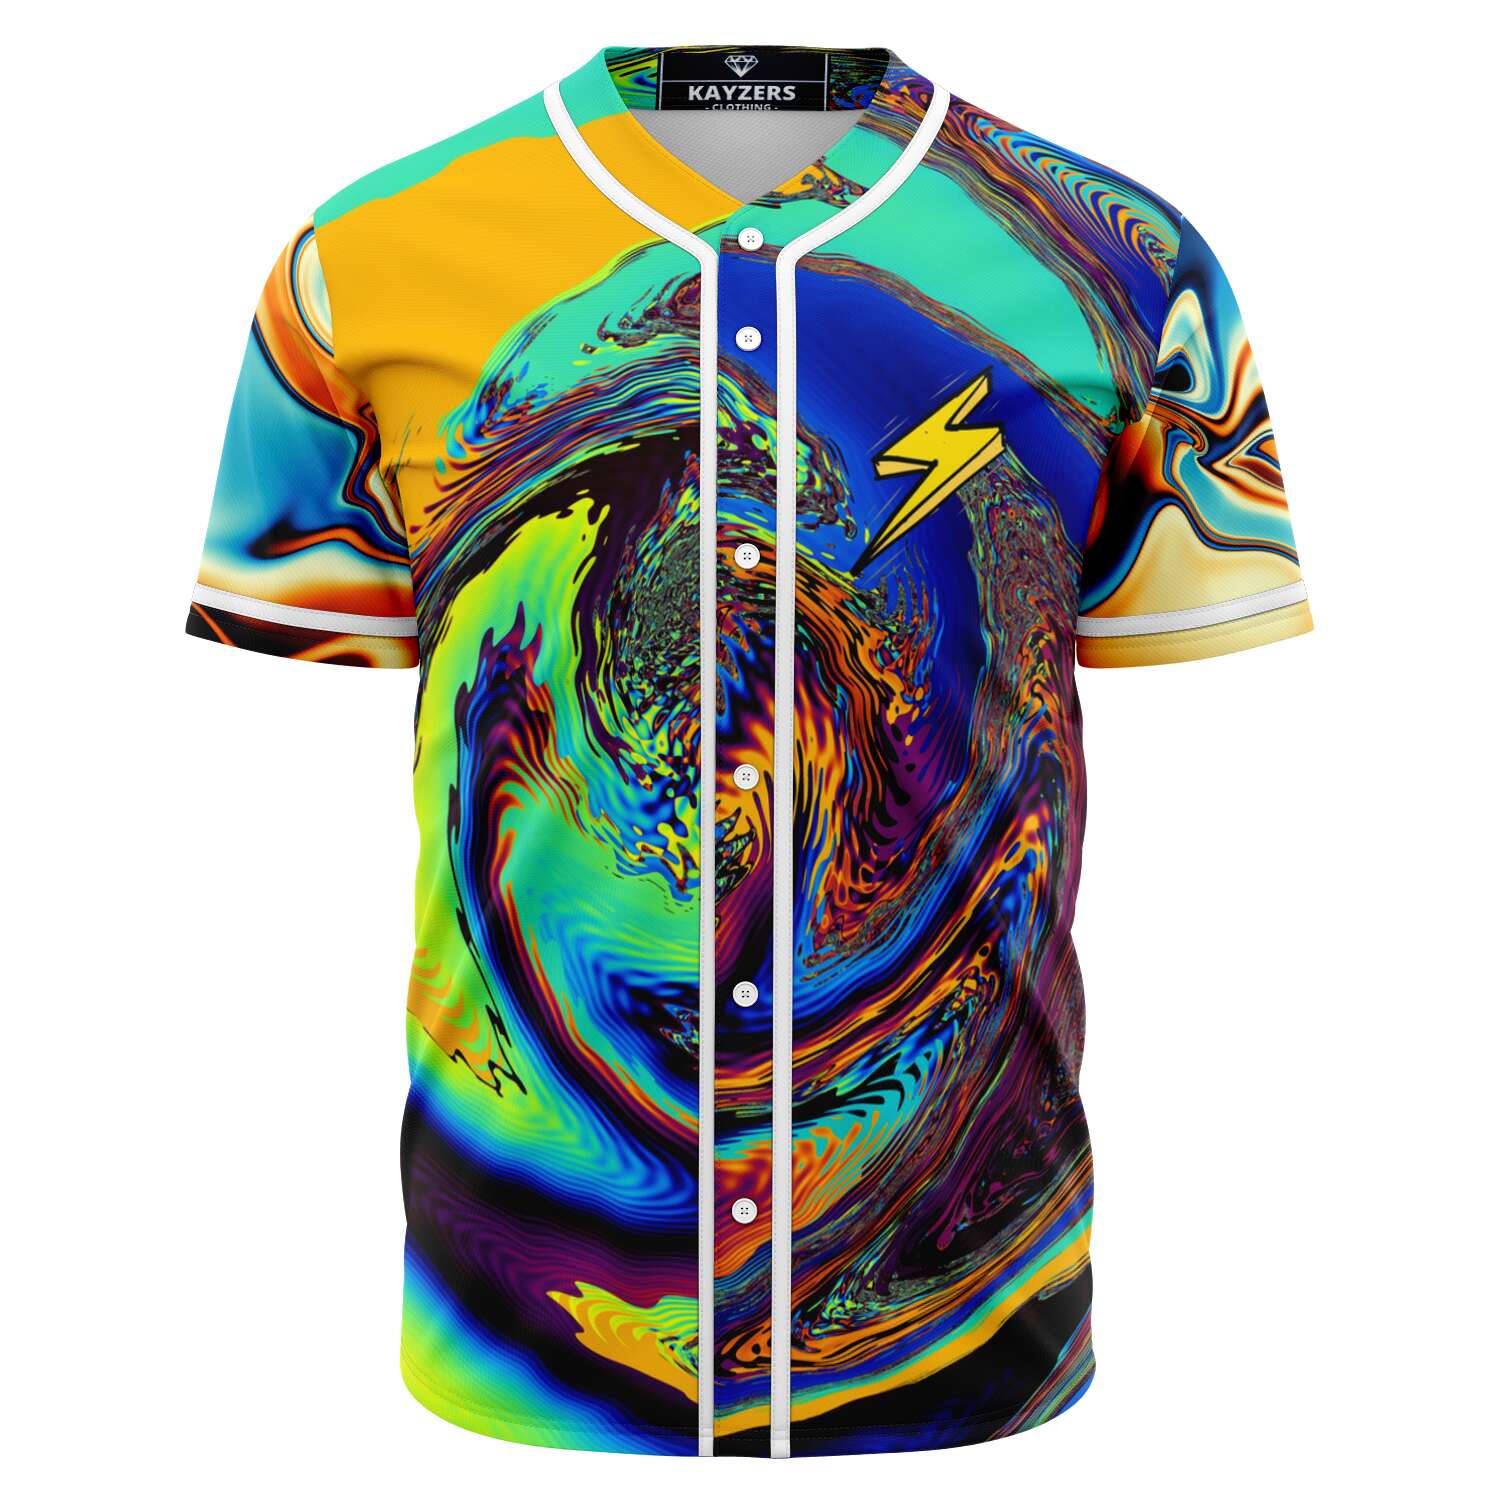 Waves Effect Nature Swirl Trees Tropical Psychedelic Beach Ocean Colorful Flash 10 Baseball Jersey - kayzers